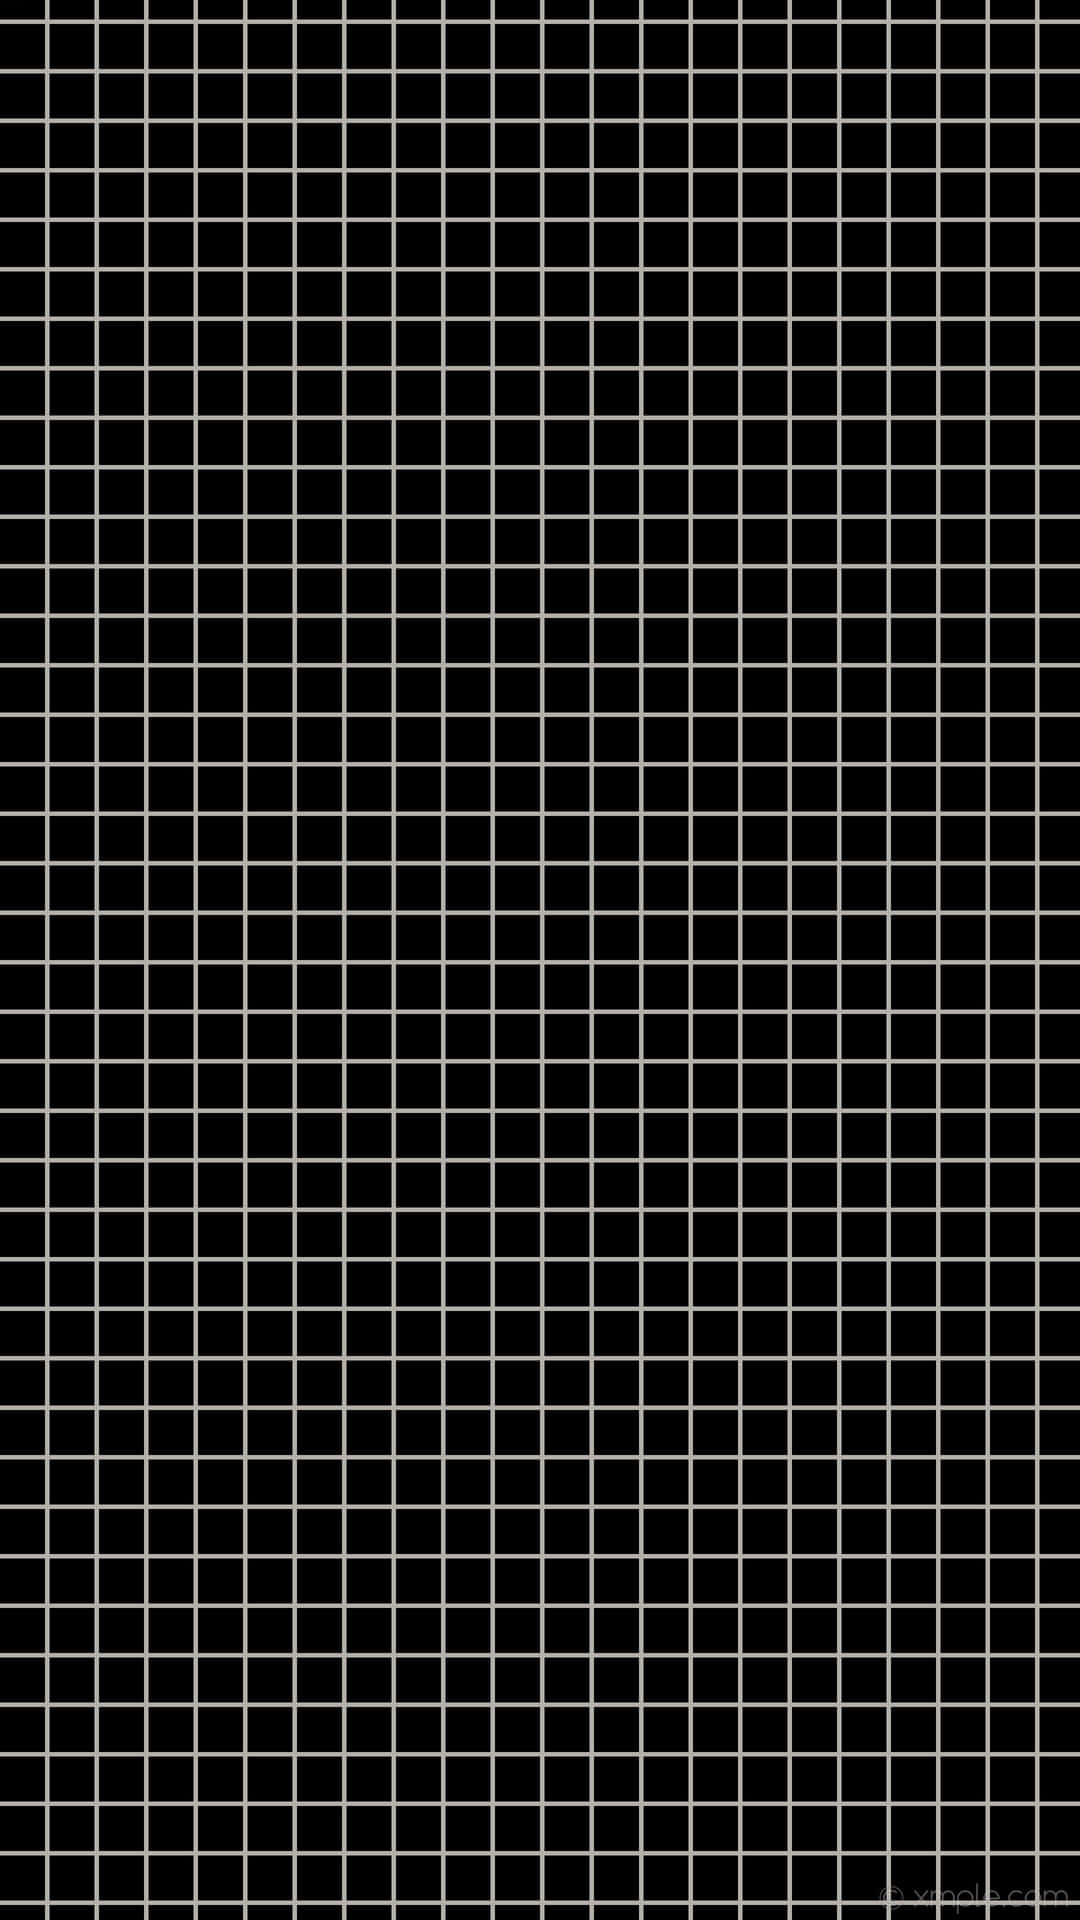 Download A Black Grid With White Lines On It Wallpaper | Wallpapers.com